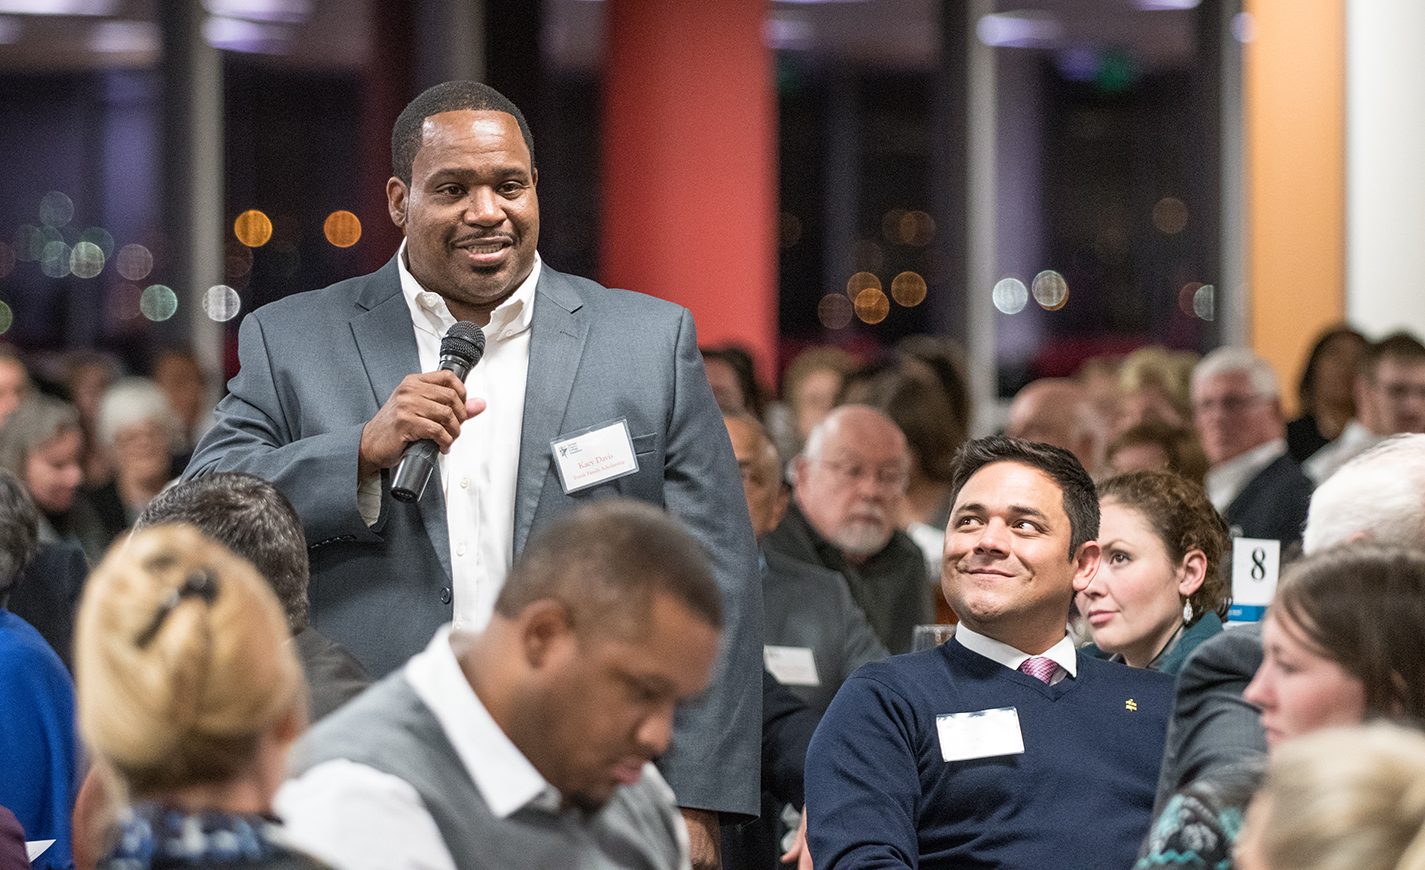 At last year’s dinner, scholarship winner Kacy Davis talks about how he stayed up all night after learning he’d won a scholarship because he was so excited.